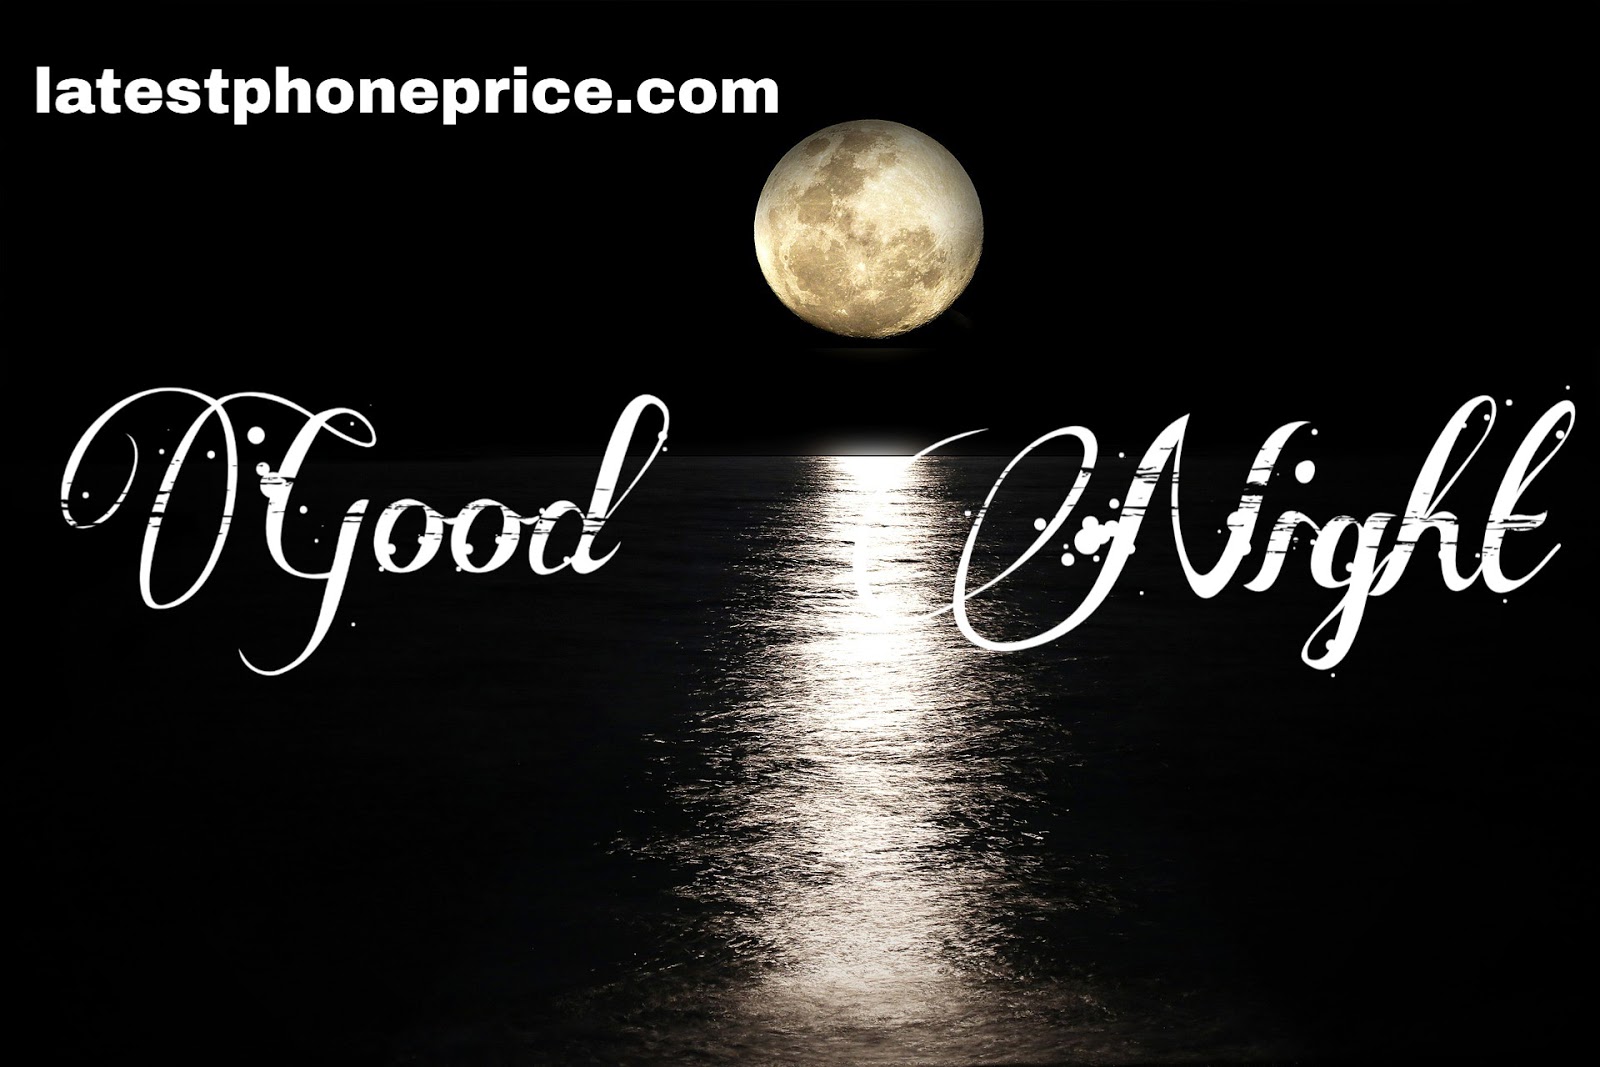 744 Good Night Image Hd Photo Picture Wallpaper Pics - Calligraphy , HD Wallpaper & Backgrounds